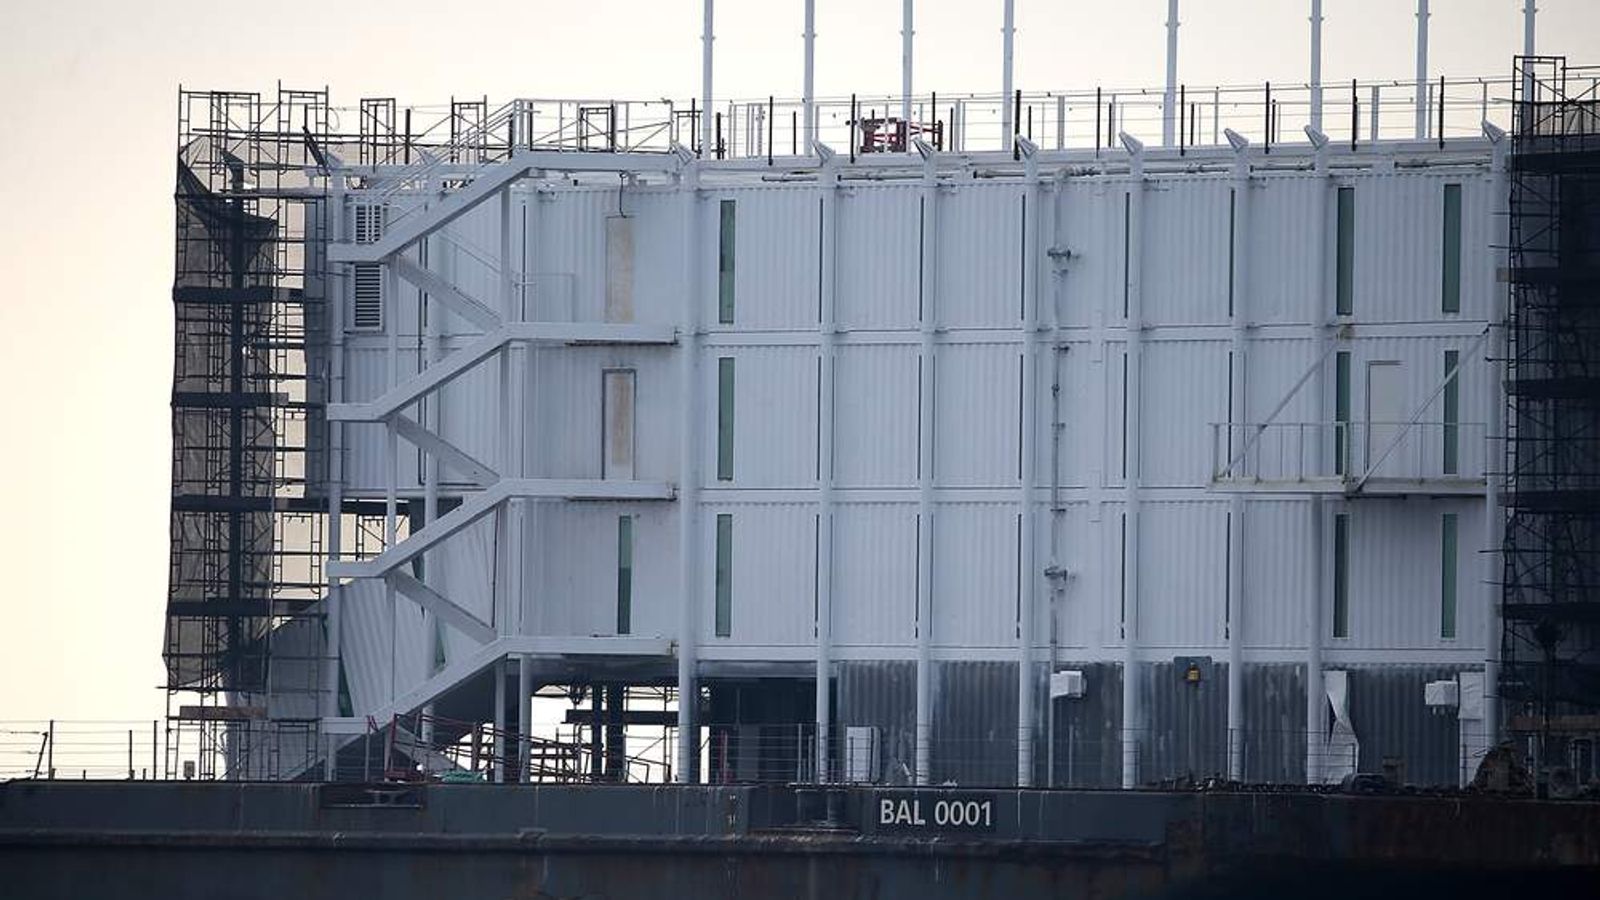 Scrapped Google Showroom Barges Were Fire Risks | Science & Tech News ...